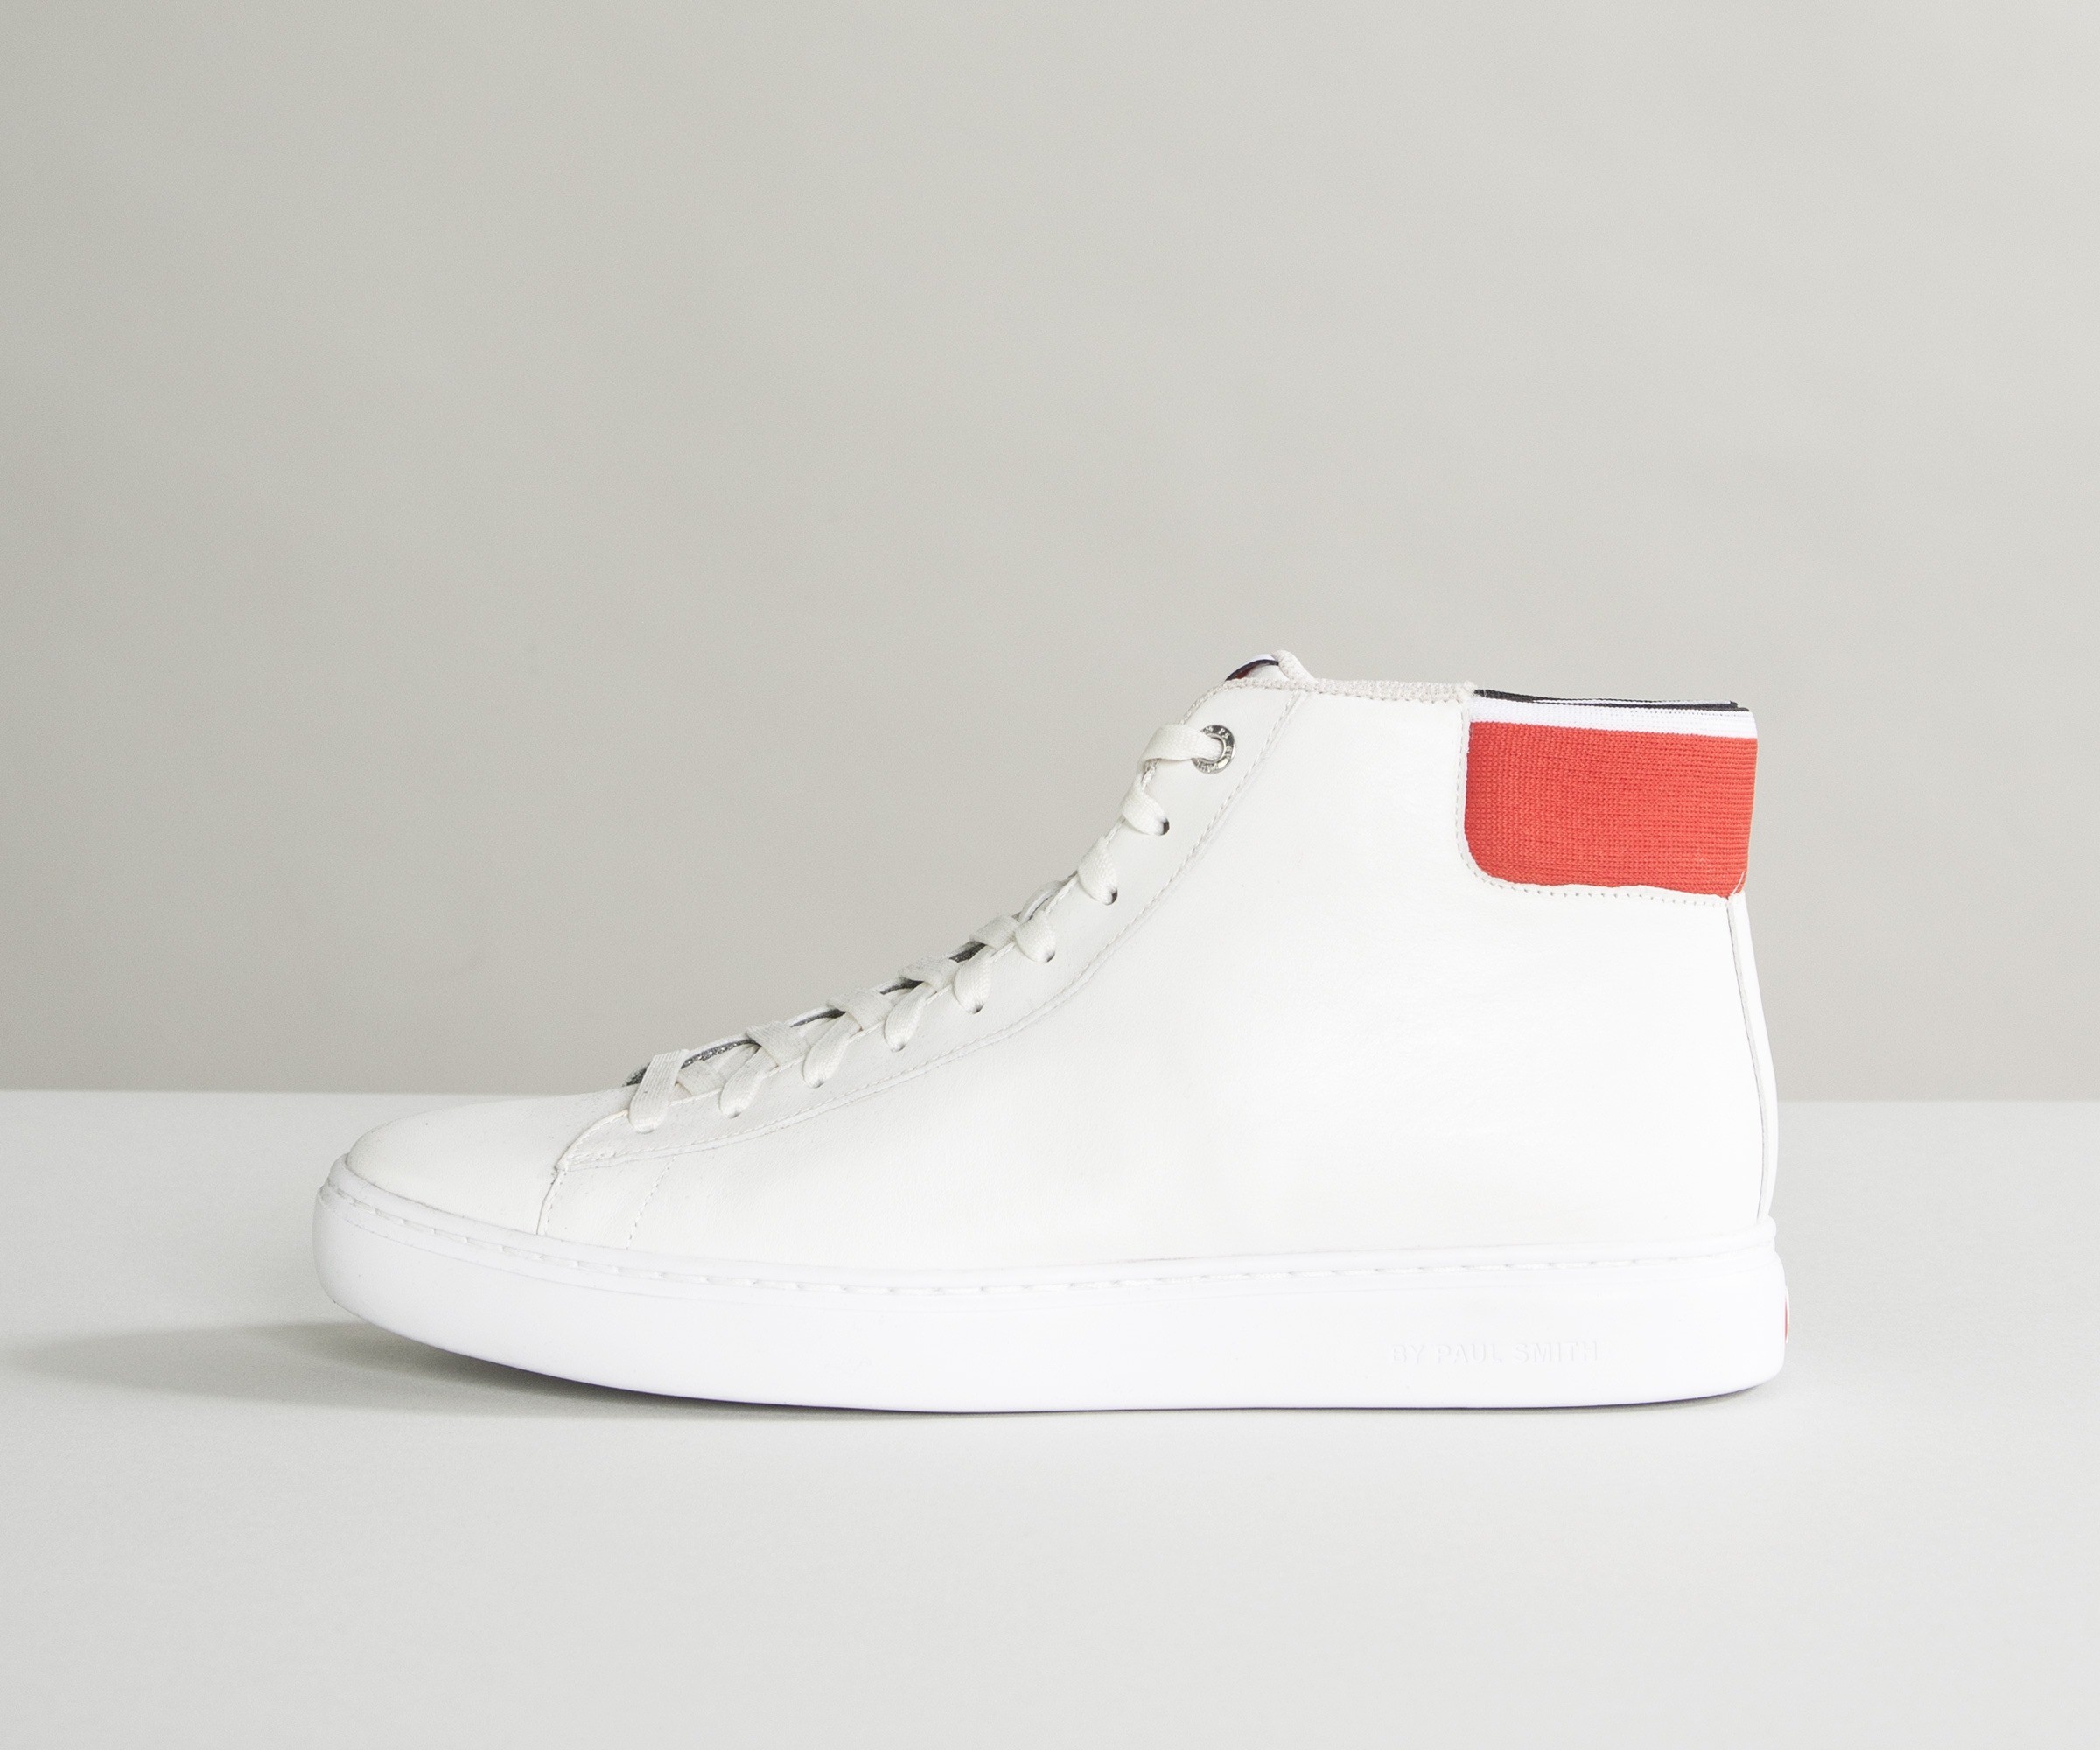 Paul Smith Shoes 'Shima' High Top Trainers White